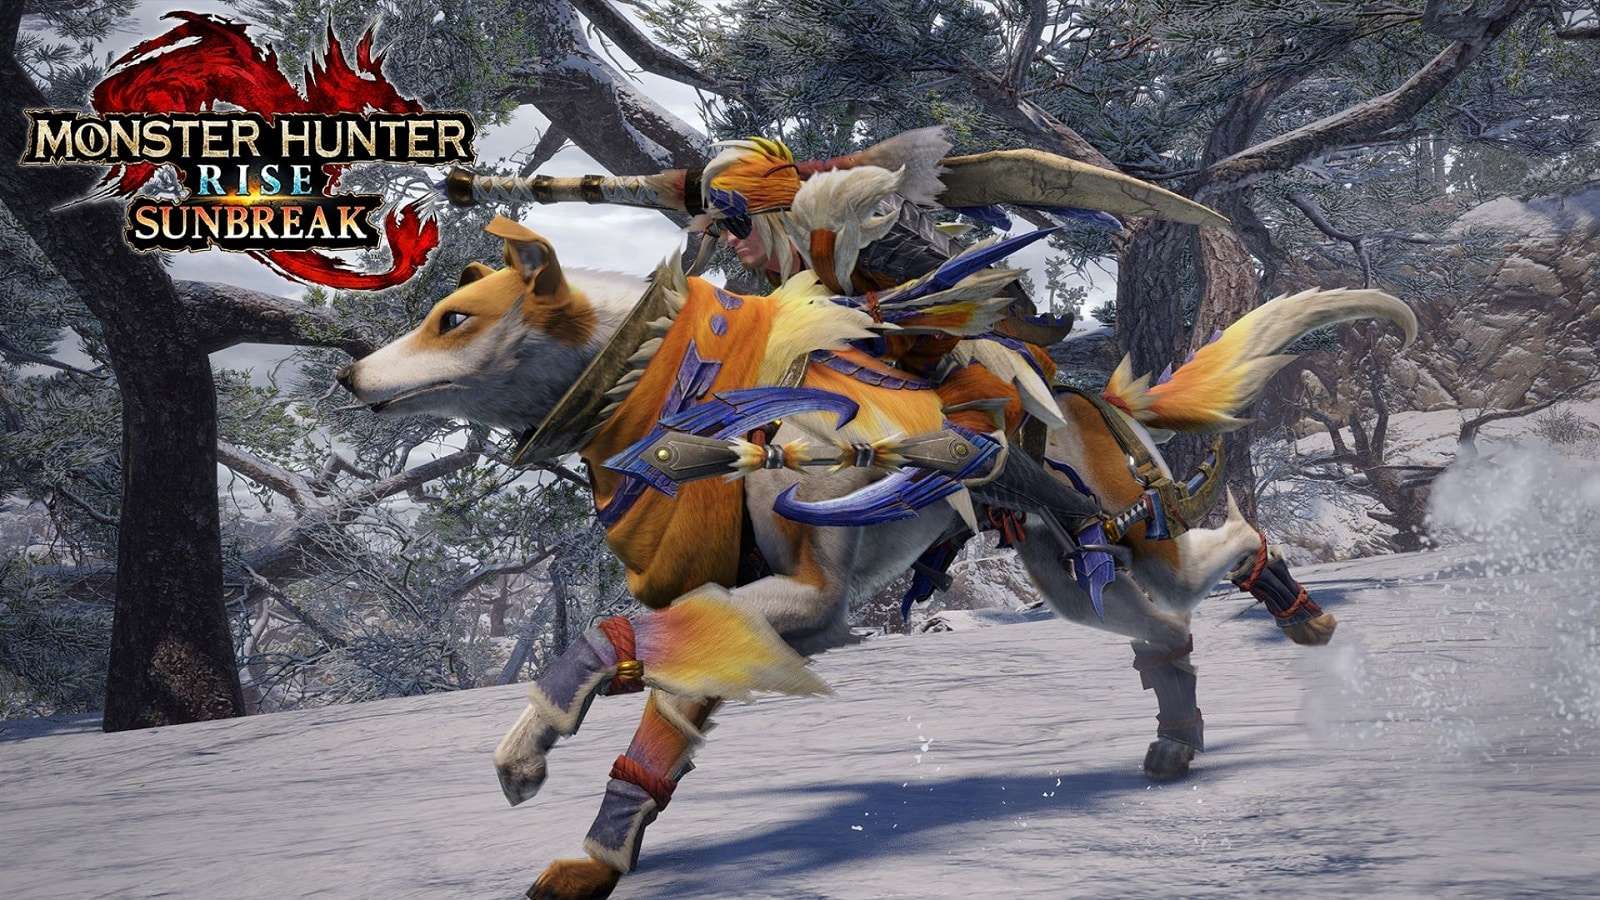 Hunter riding a Palamute in Monster Hunter Rise